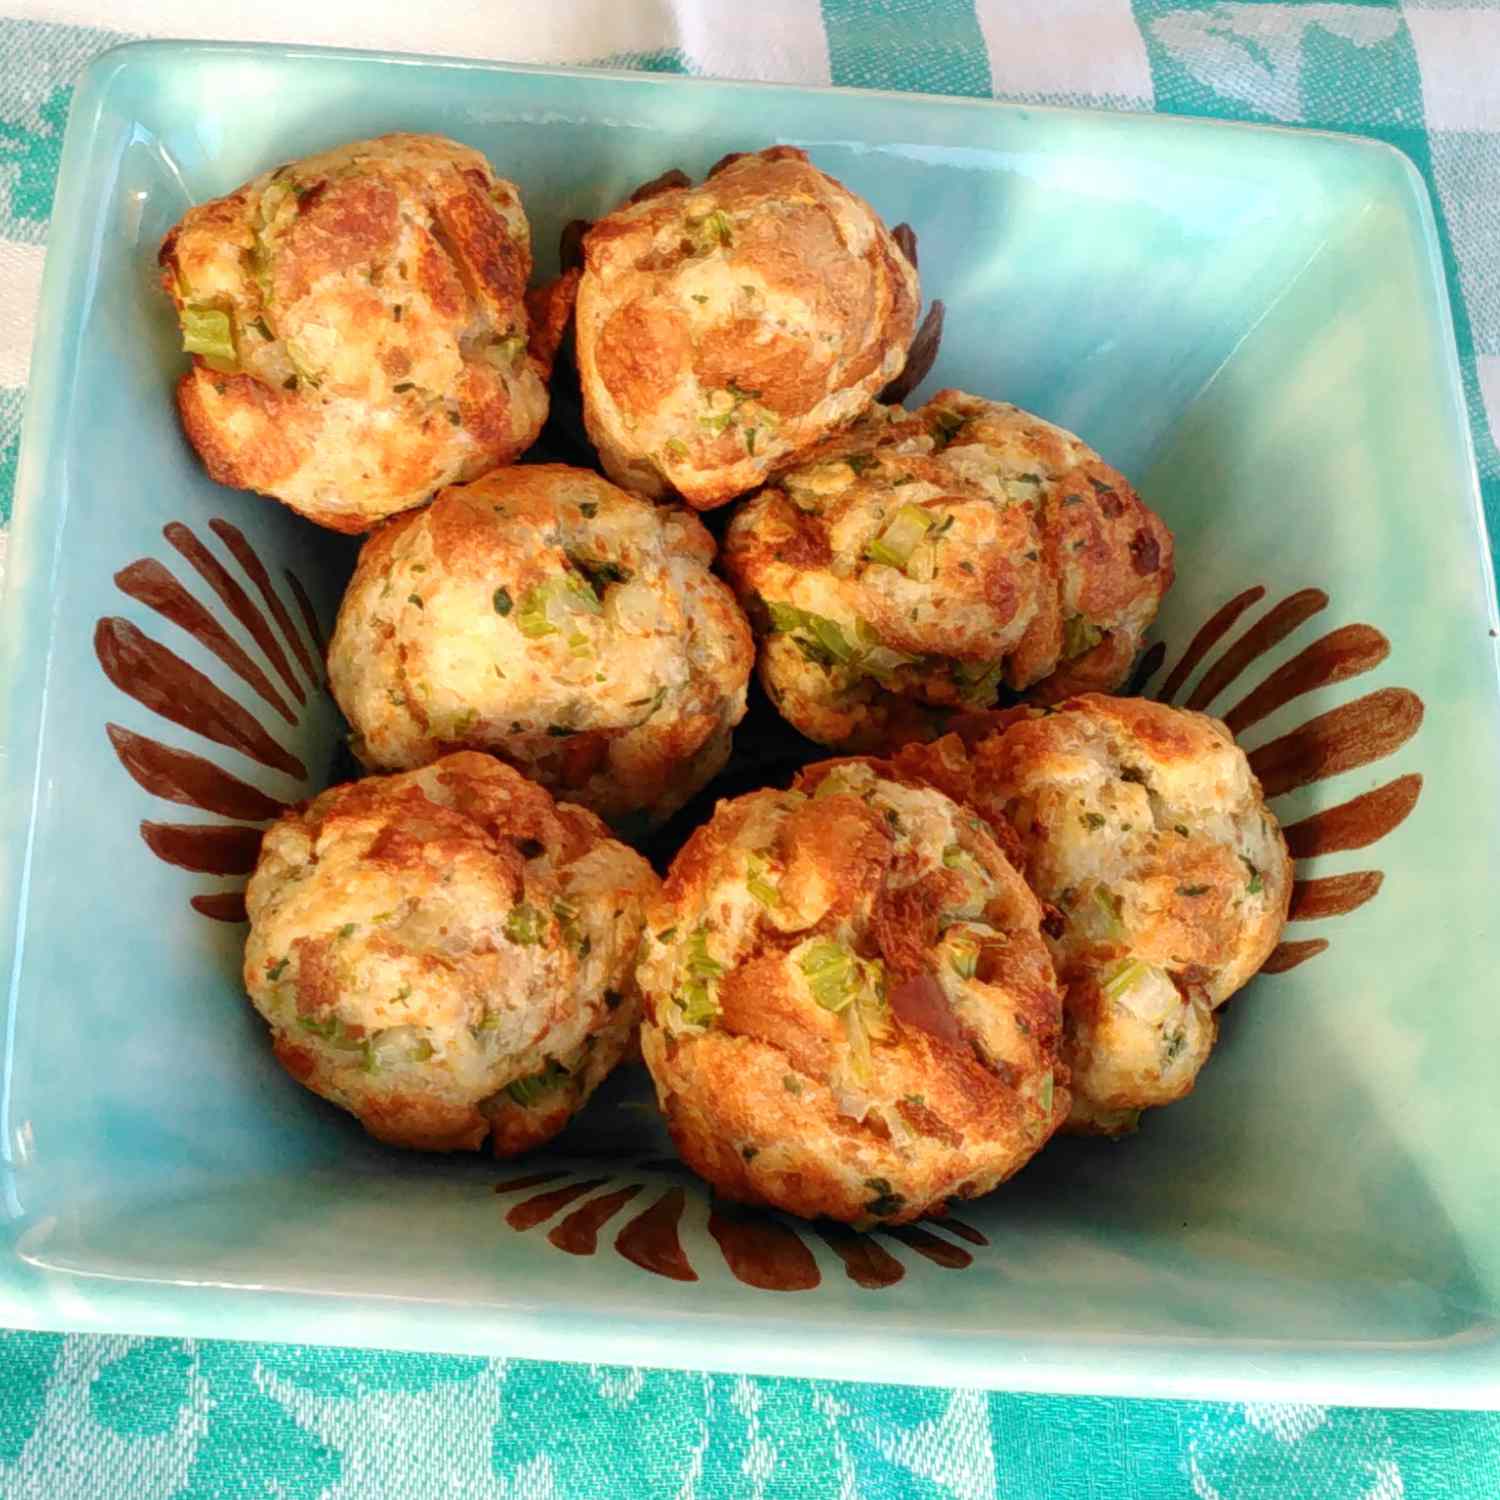 stuffing balls in a blue dish